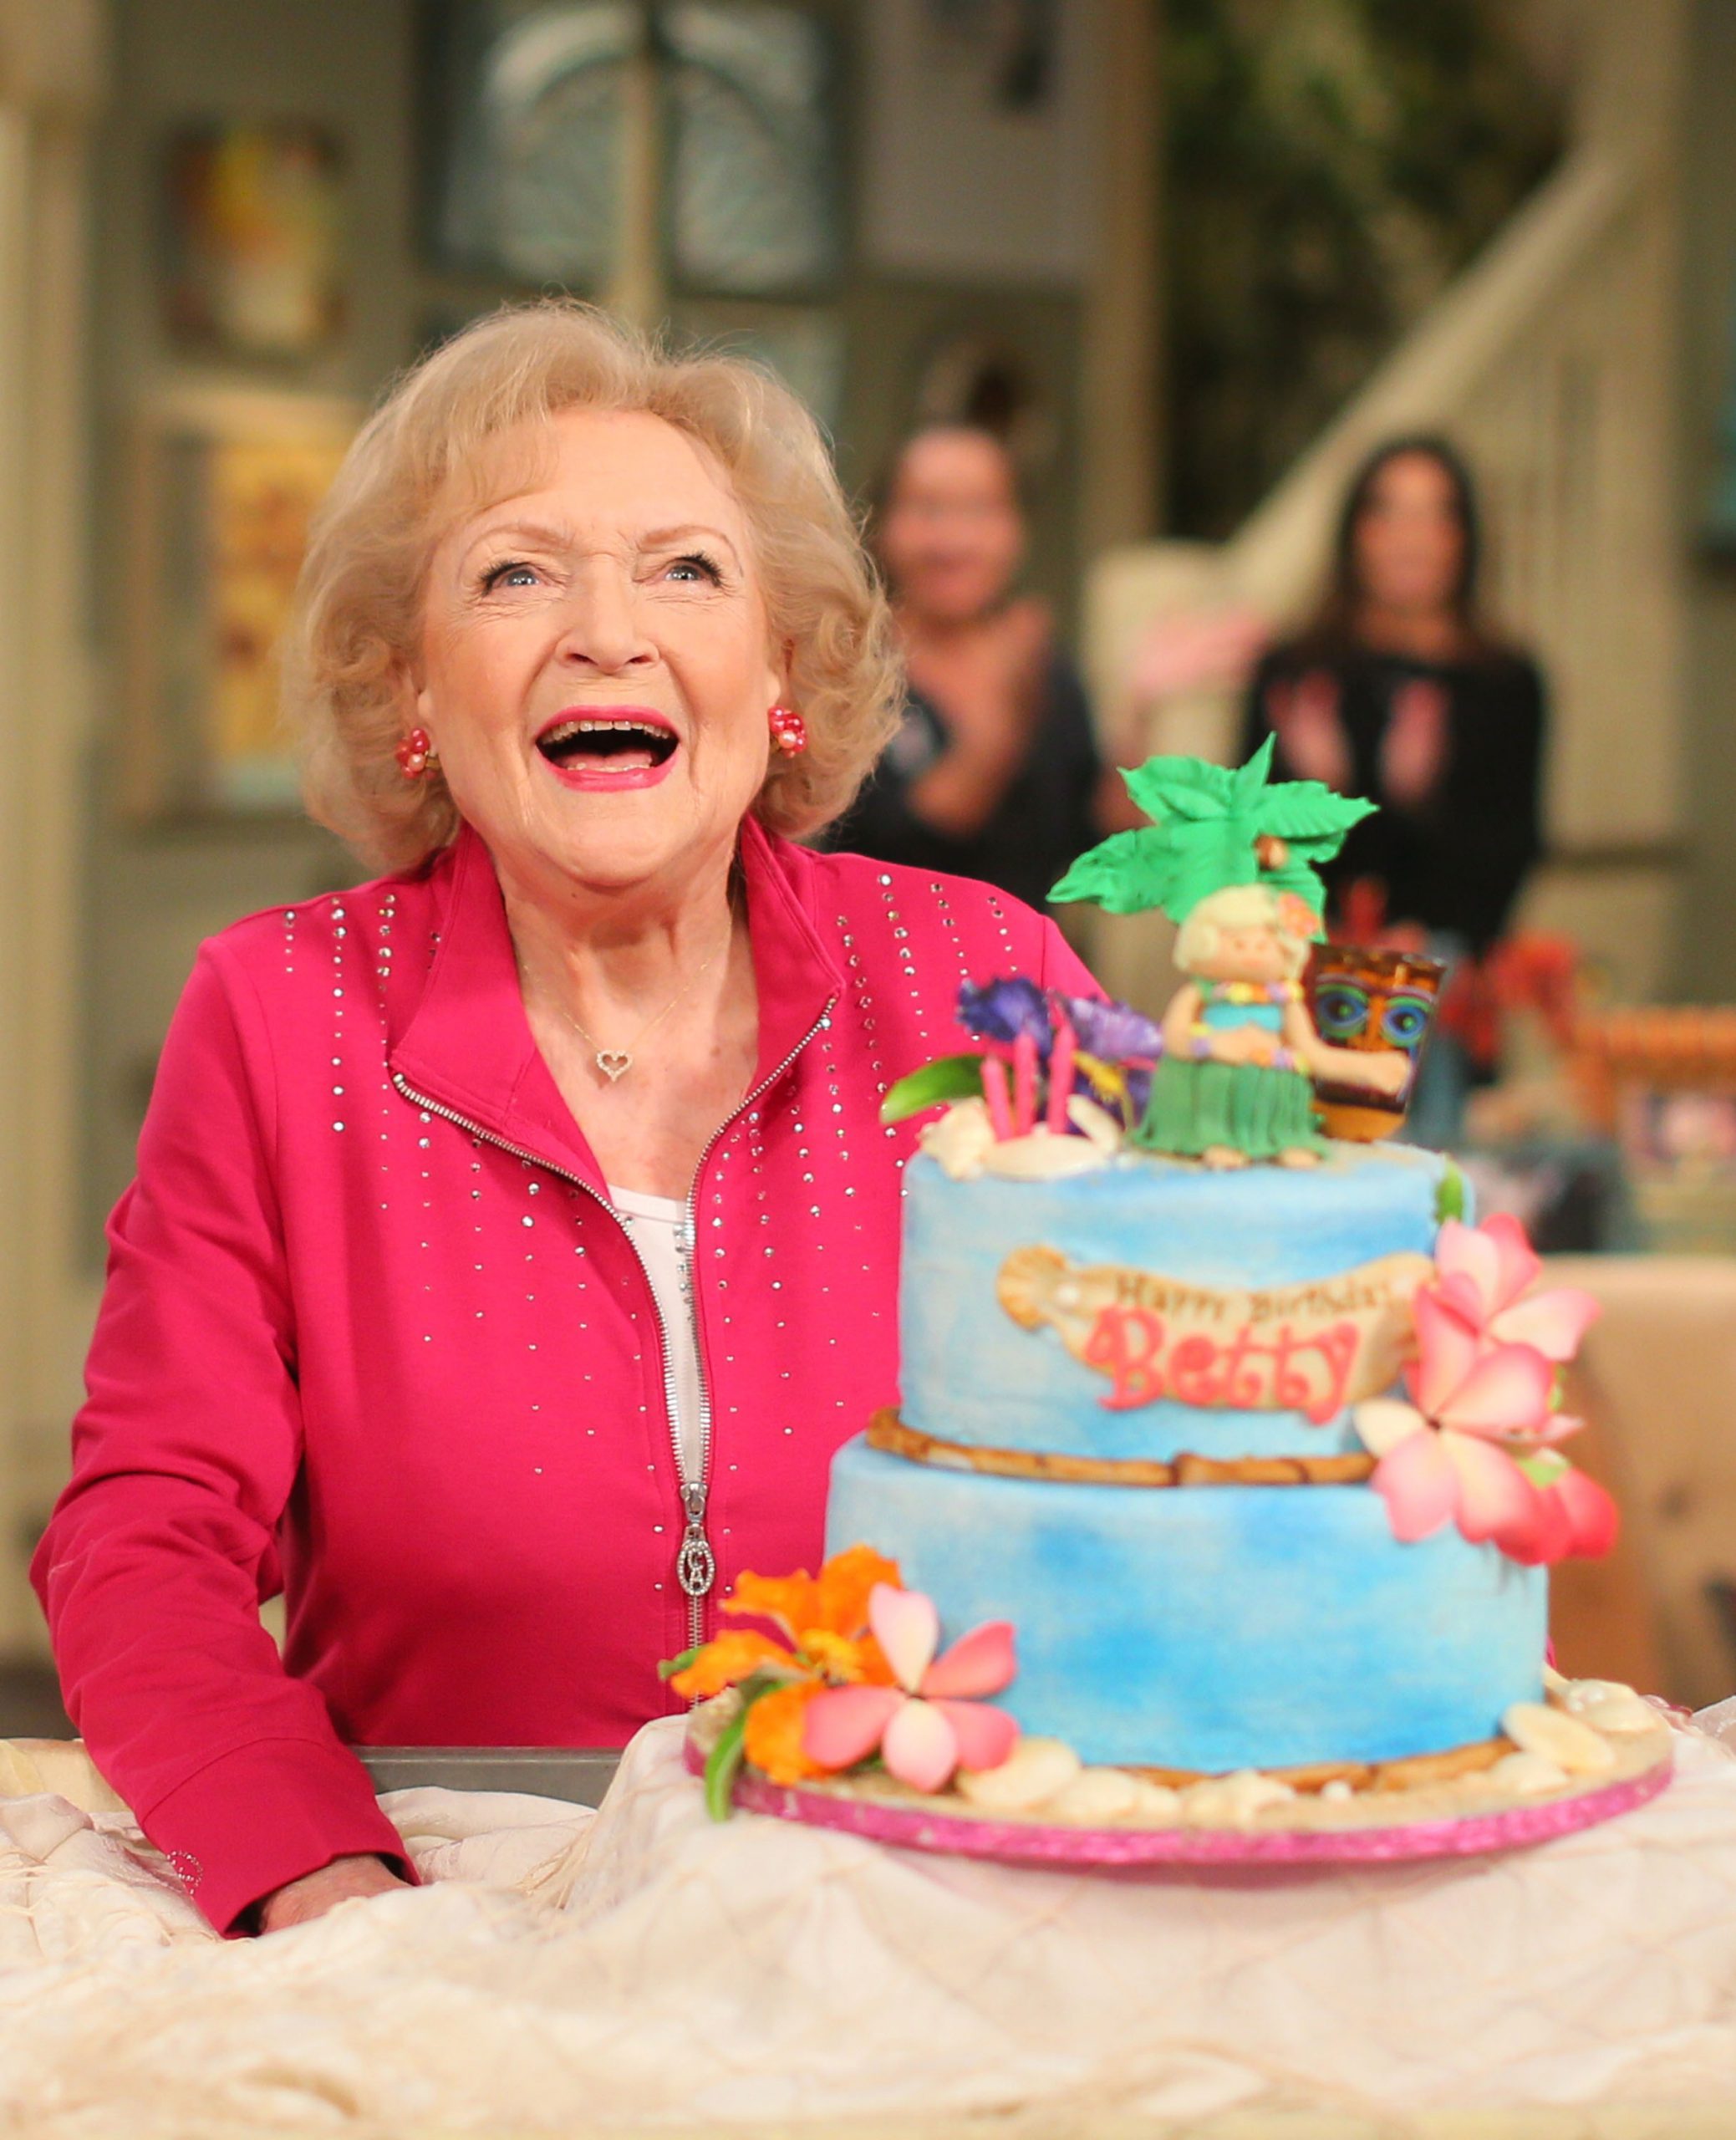 Actress Betty White poses next to her cake at the celebration of her 93rd birthday on the set of "Hot in Cleveland" January 16, 2015